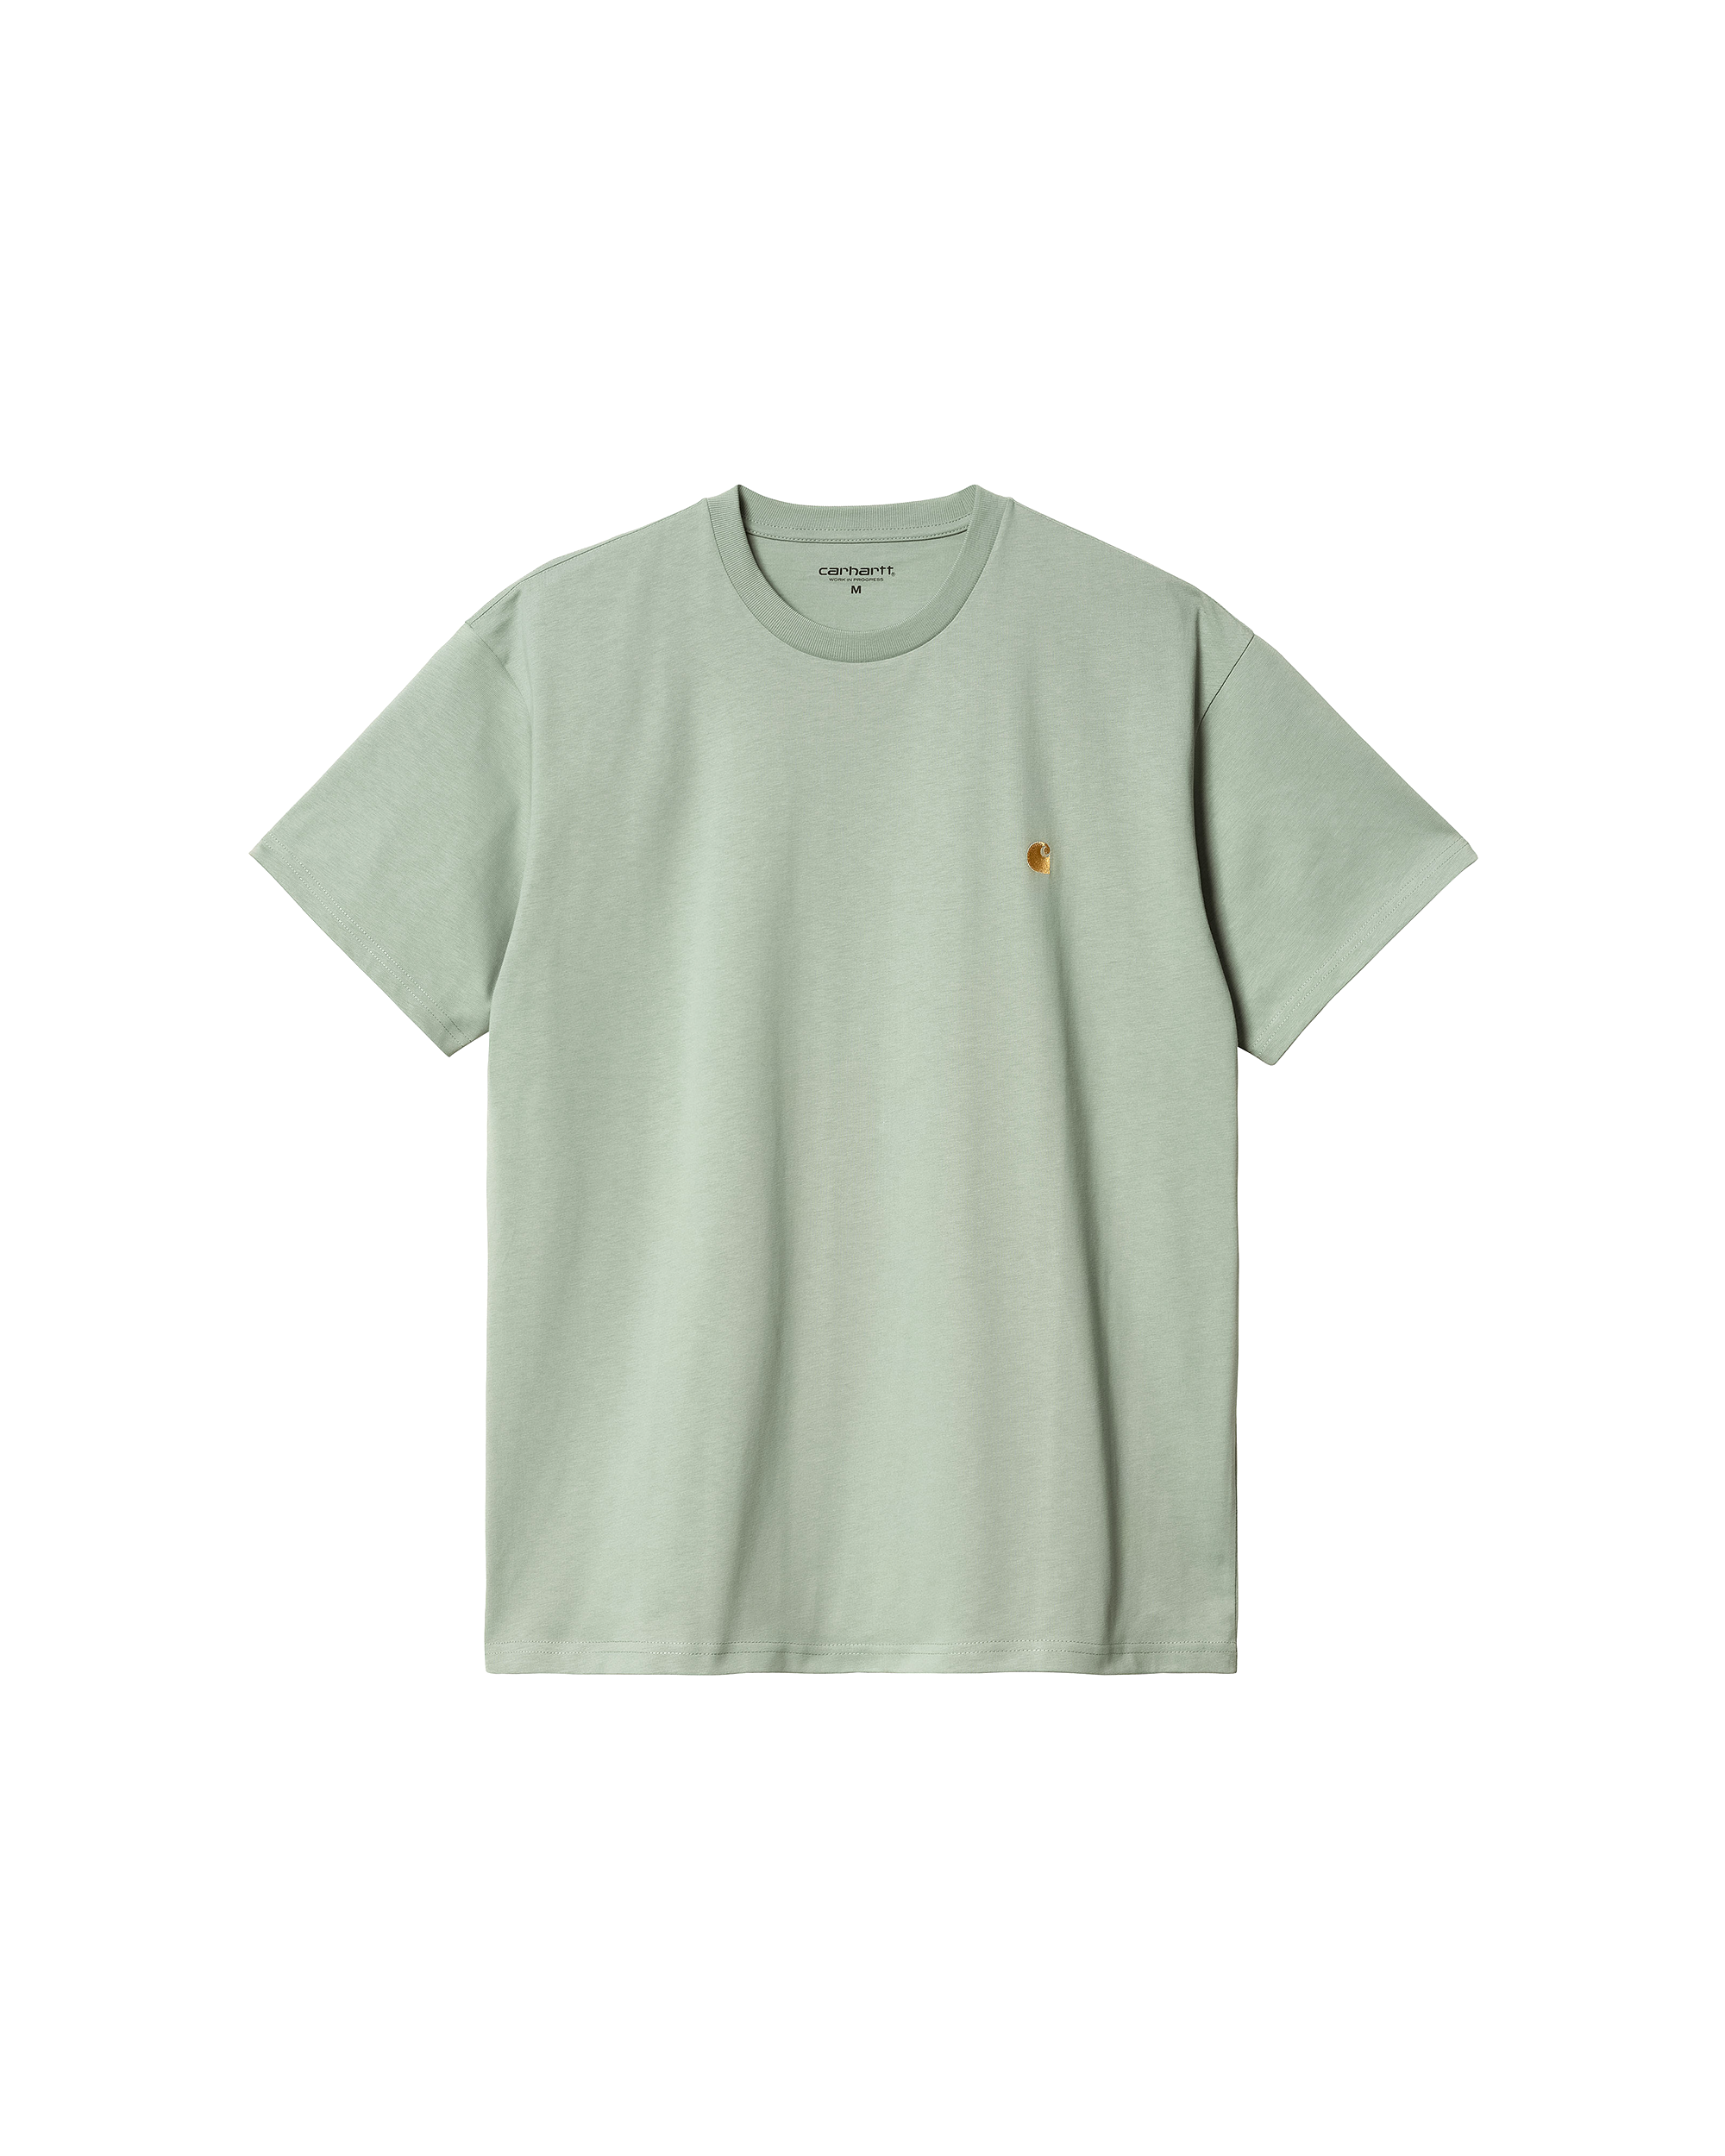 S/S Chase T-Shirt - Glassy Teal / Gold